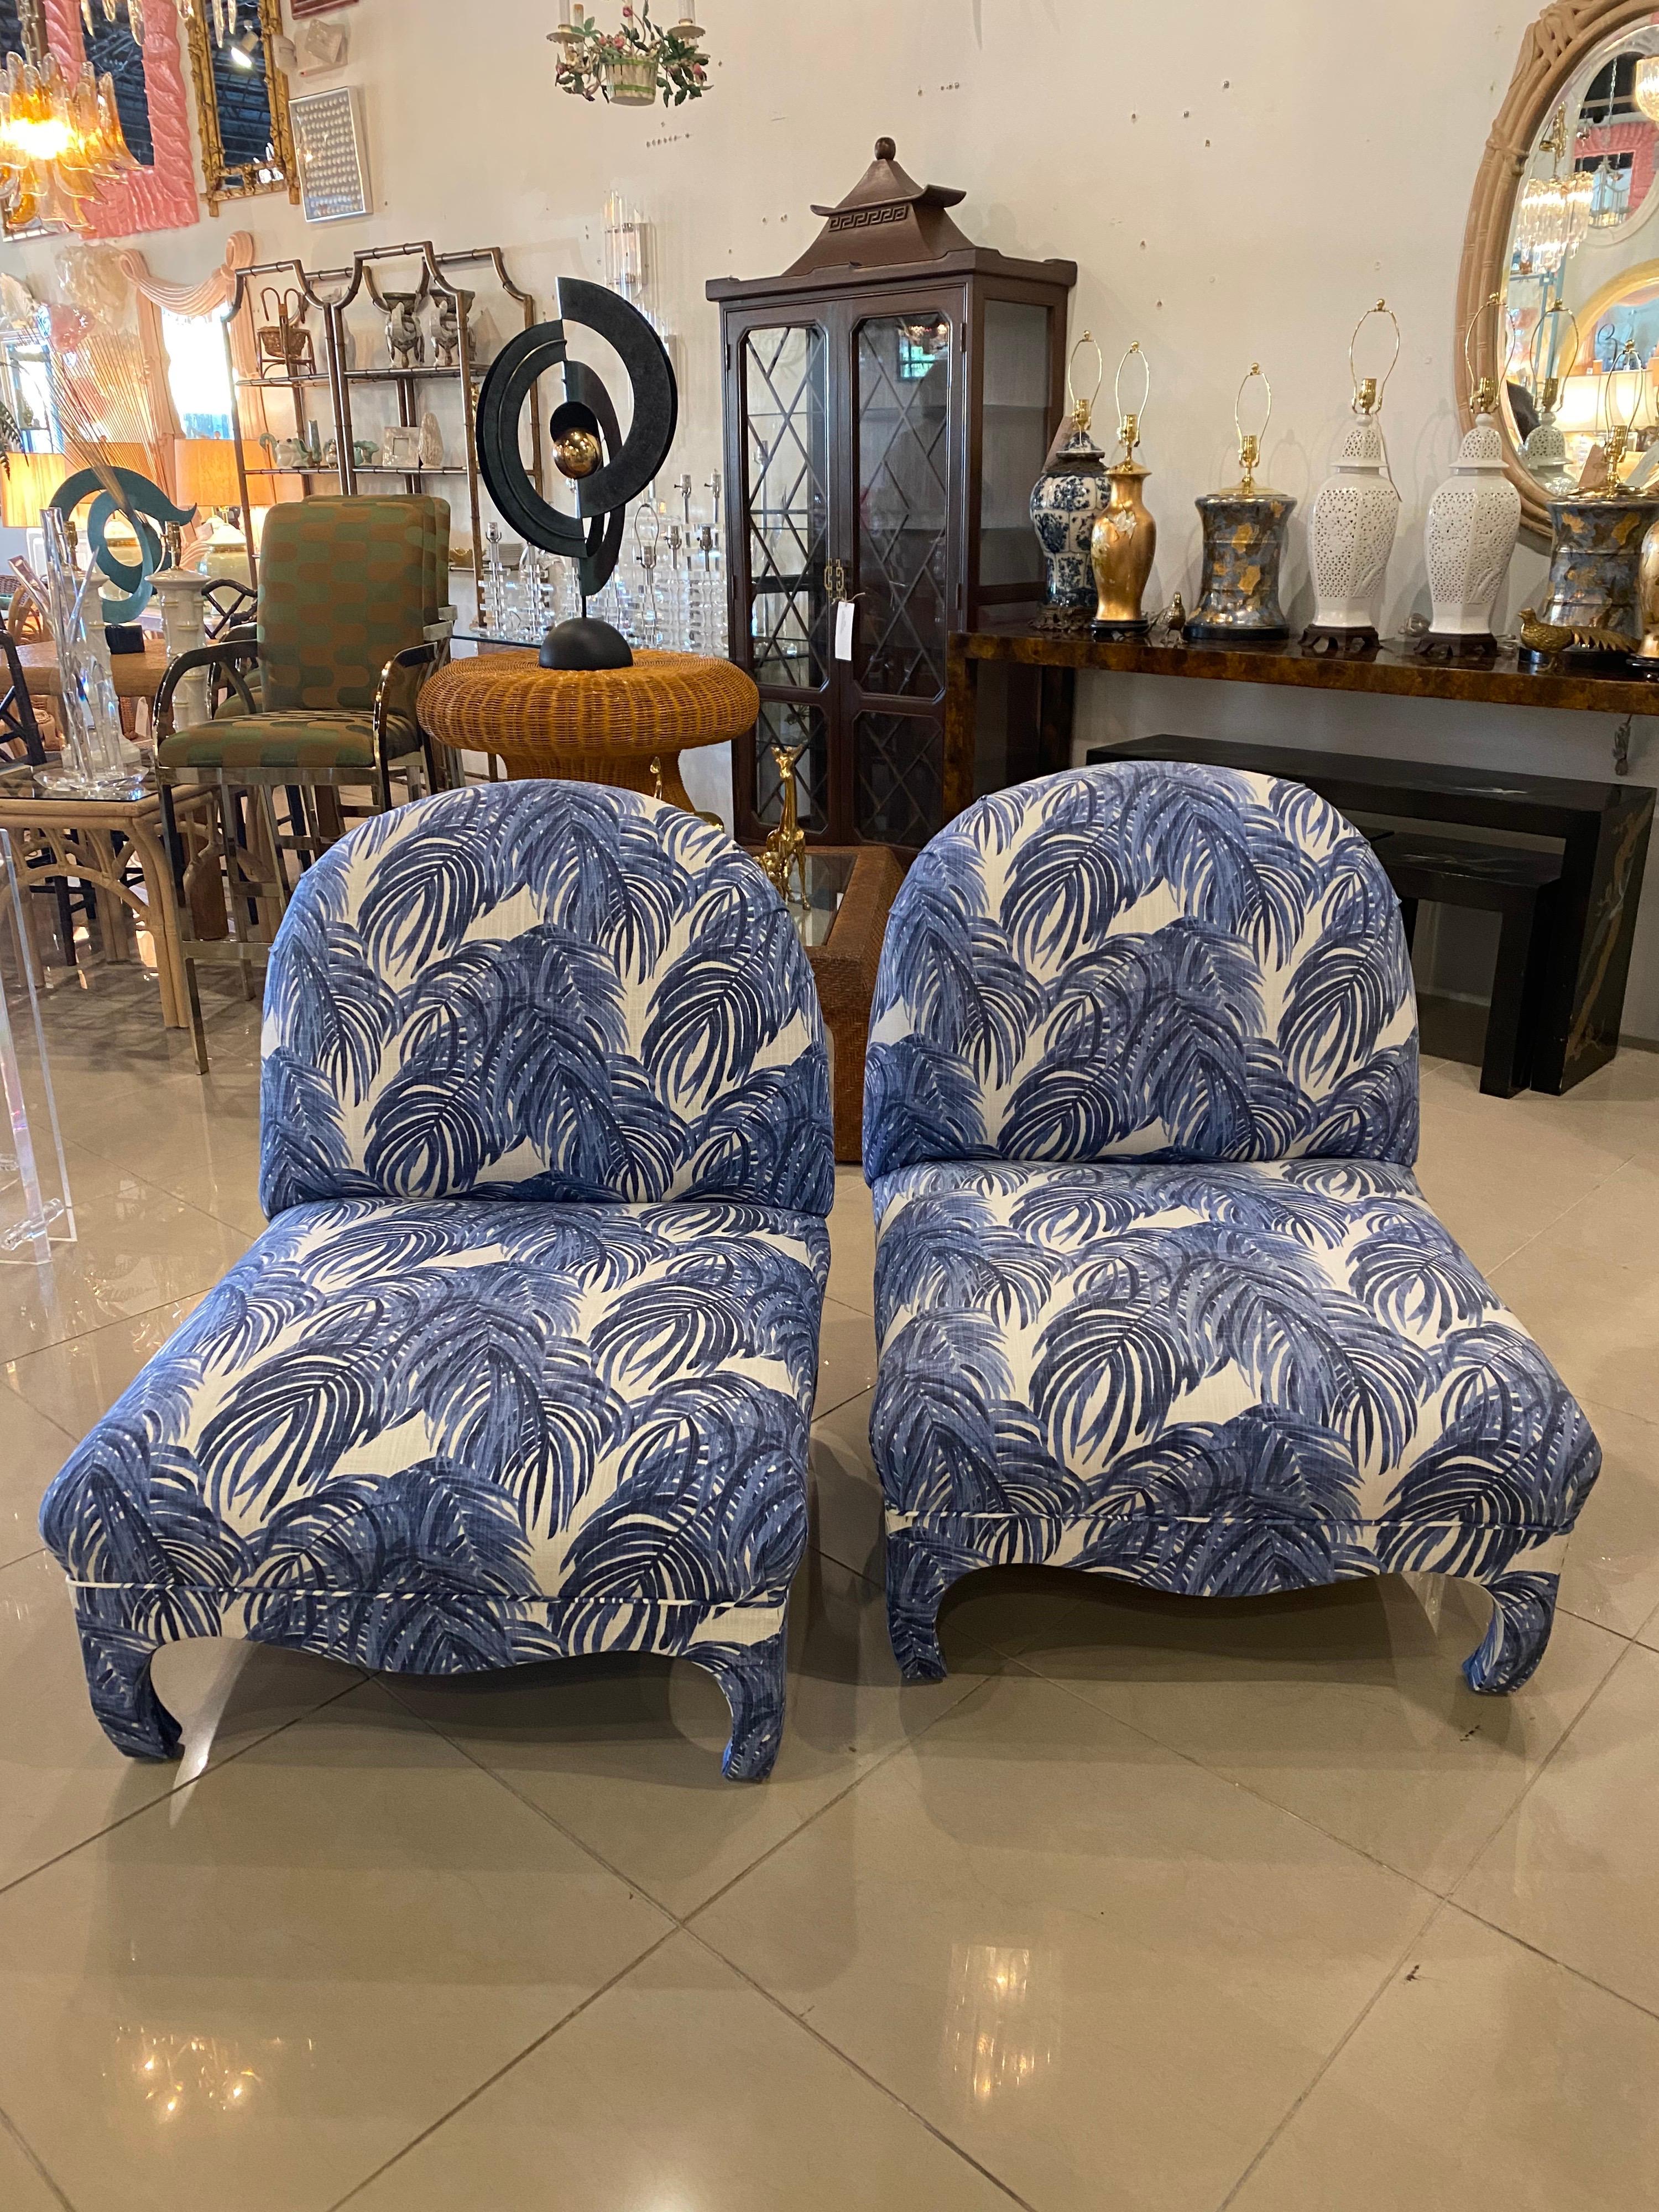 The most amazing pair of vintage slipper chairs. These have been newly upholstered in a linen blend blue and white palm leaf fabric. The feet are all ming and there is scalloped edges all the way around. These chairs could float in a room and look